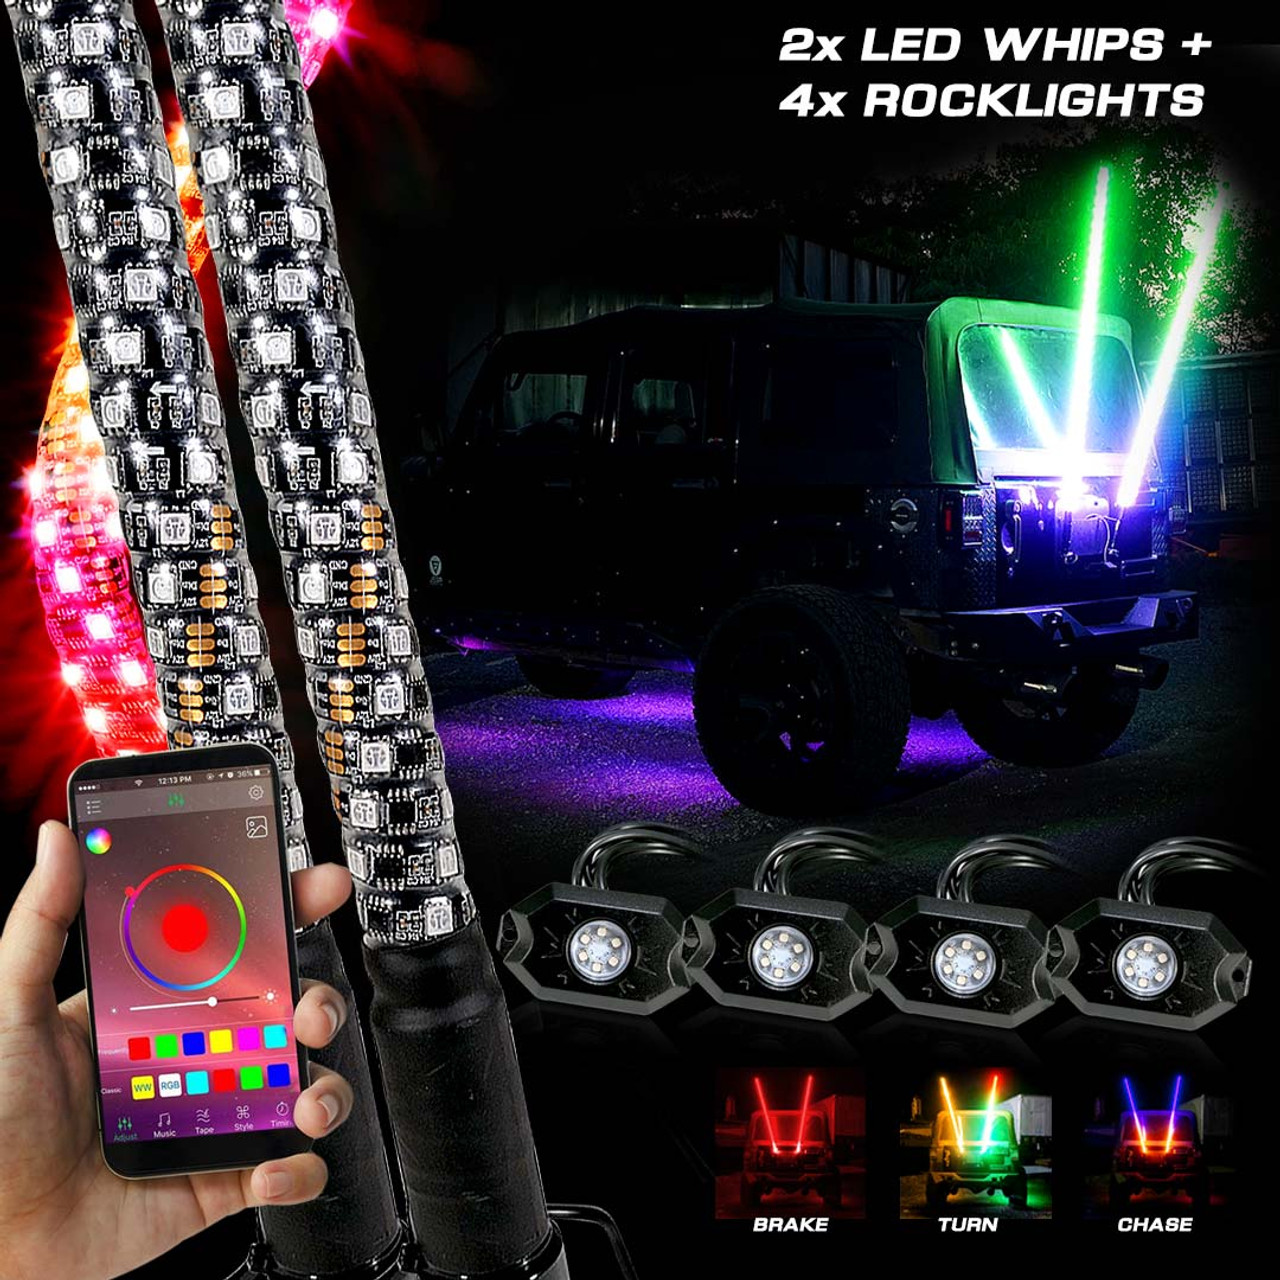 2x Color Chasing Whip with 4x Rock Lights - JPFEDERATION